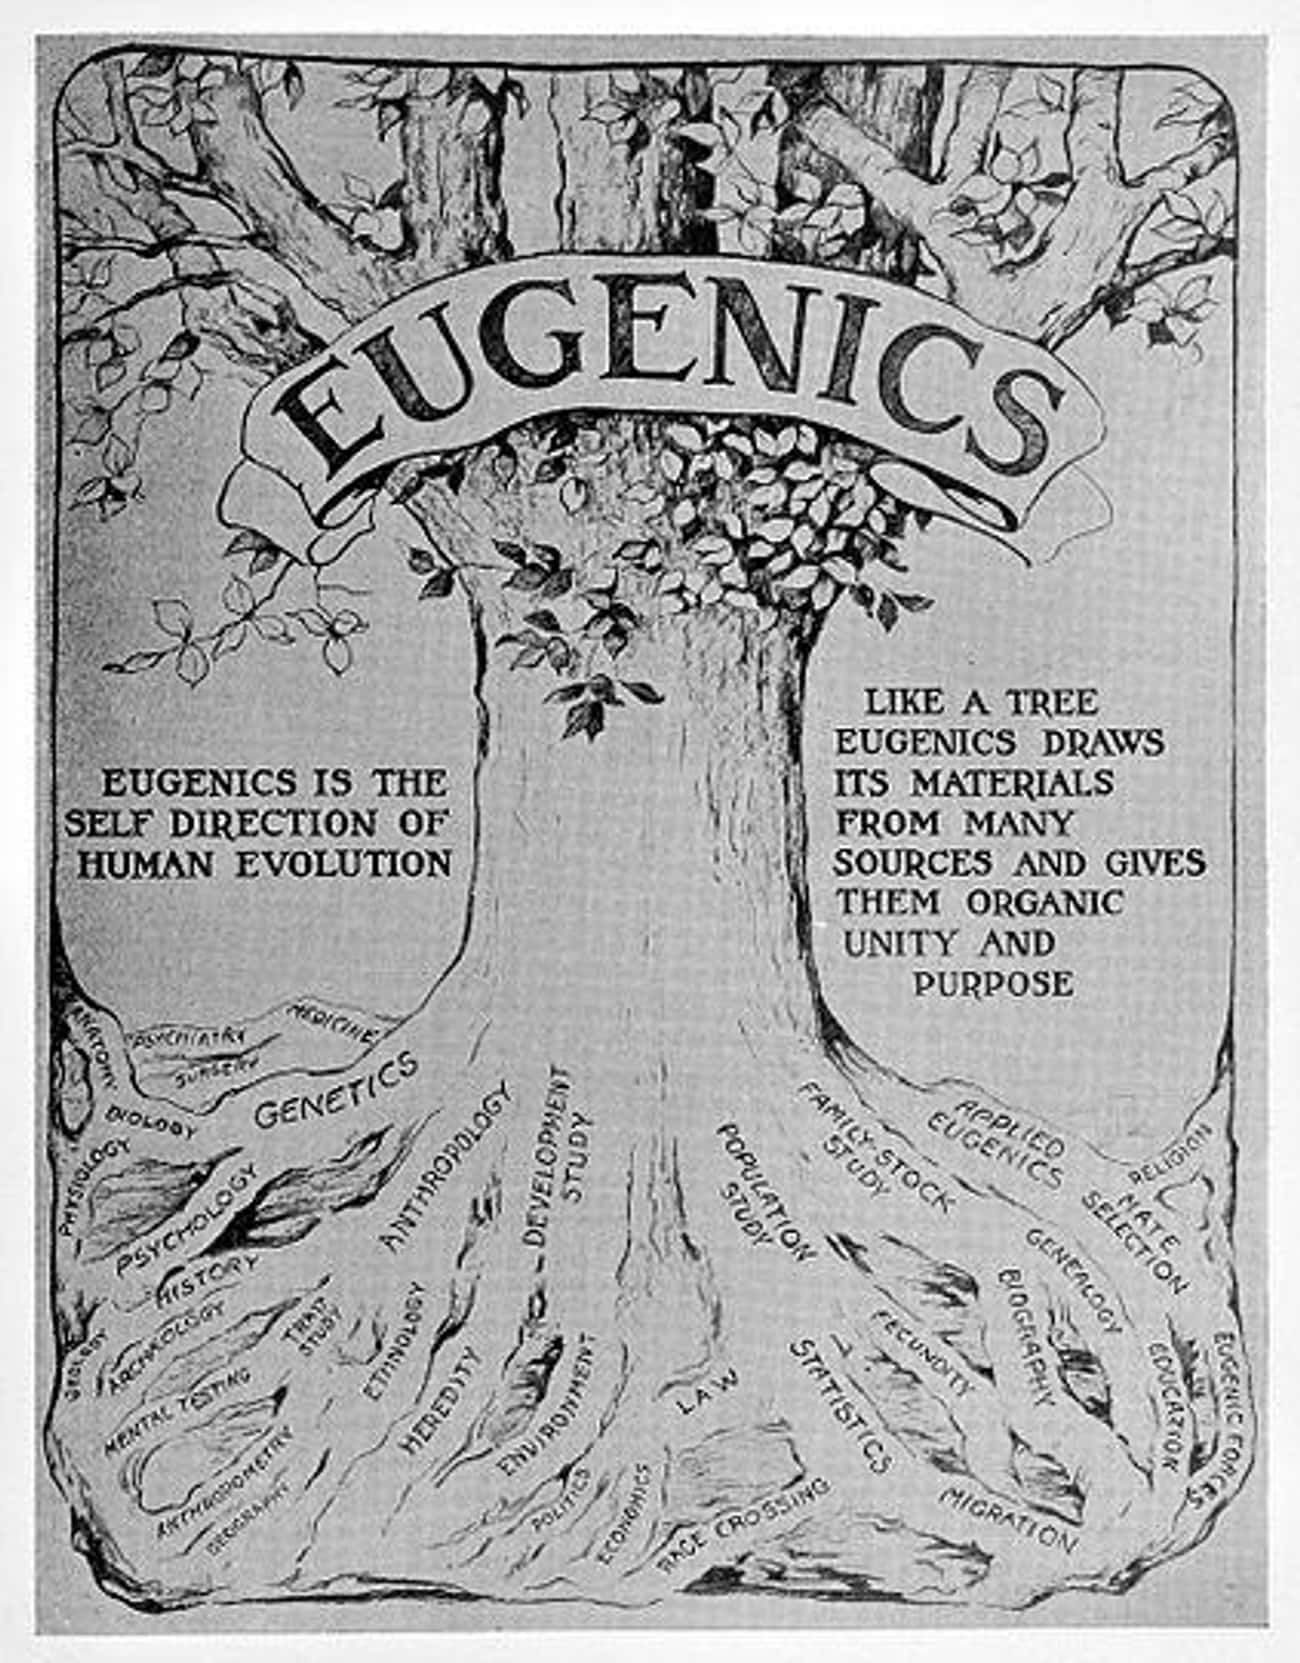 Eugenics Was Marketed As A Science That Could Improve Society